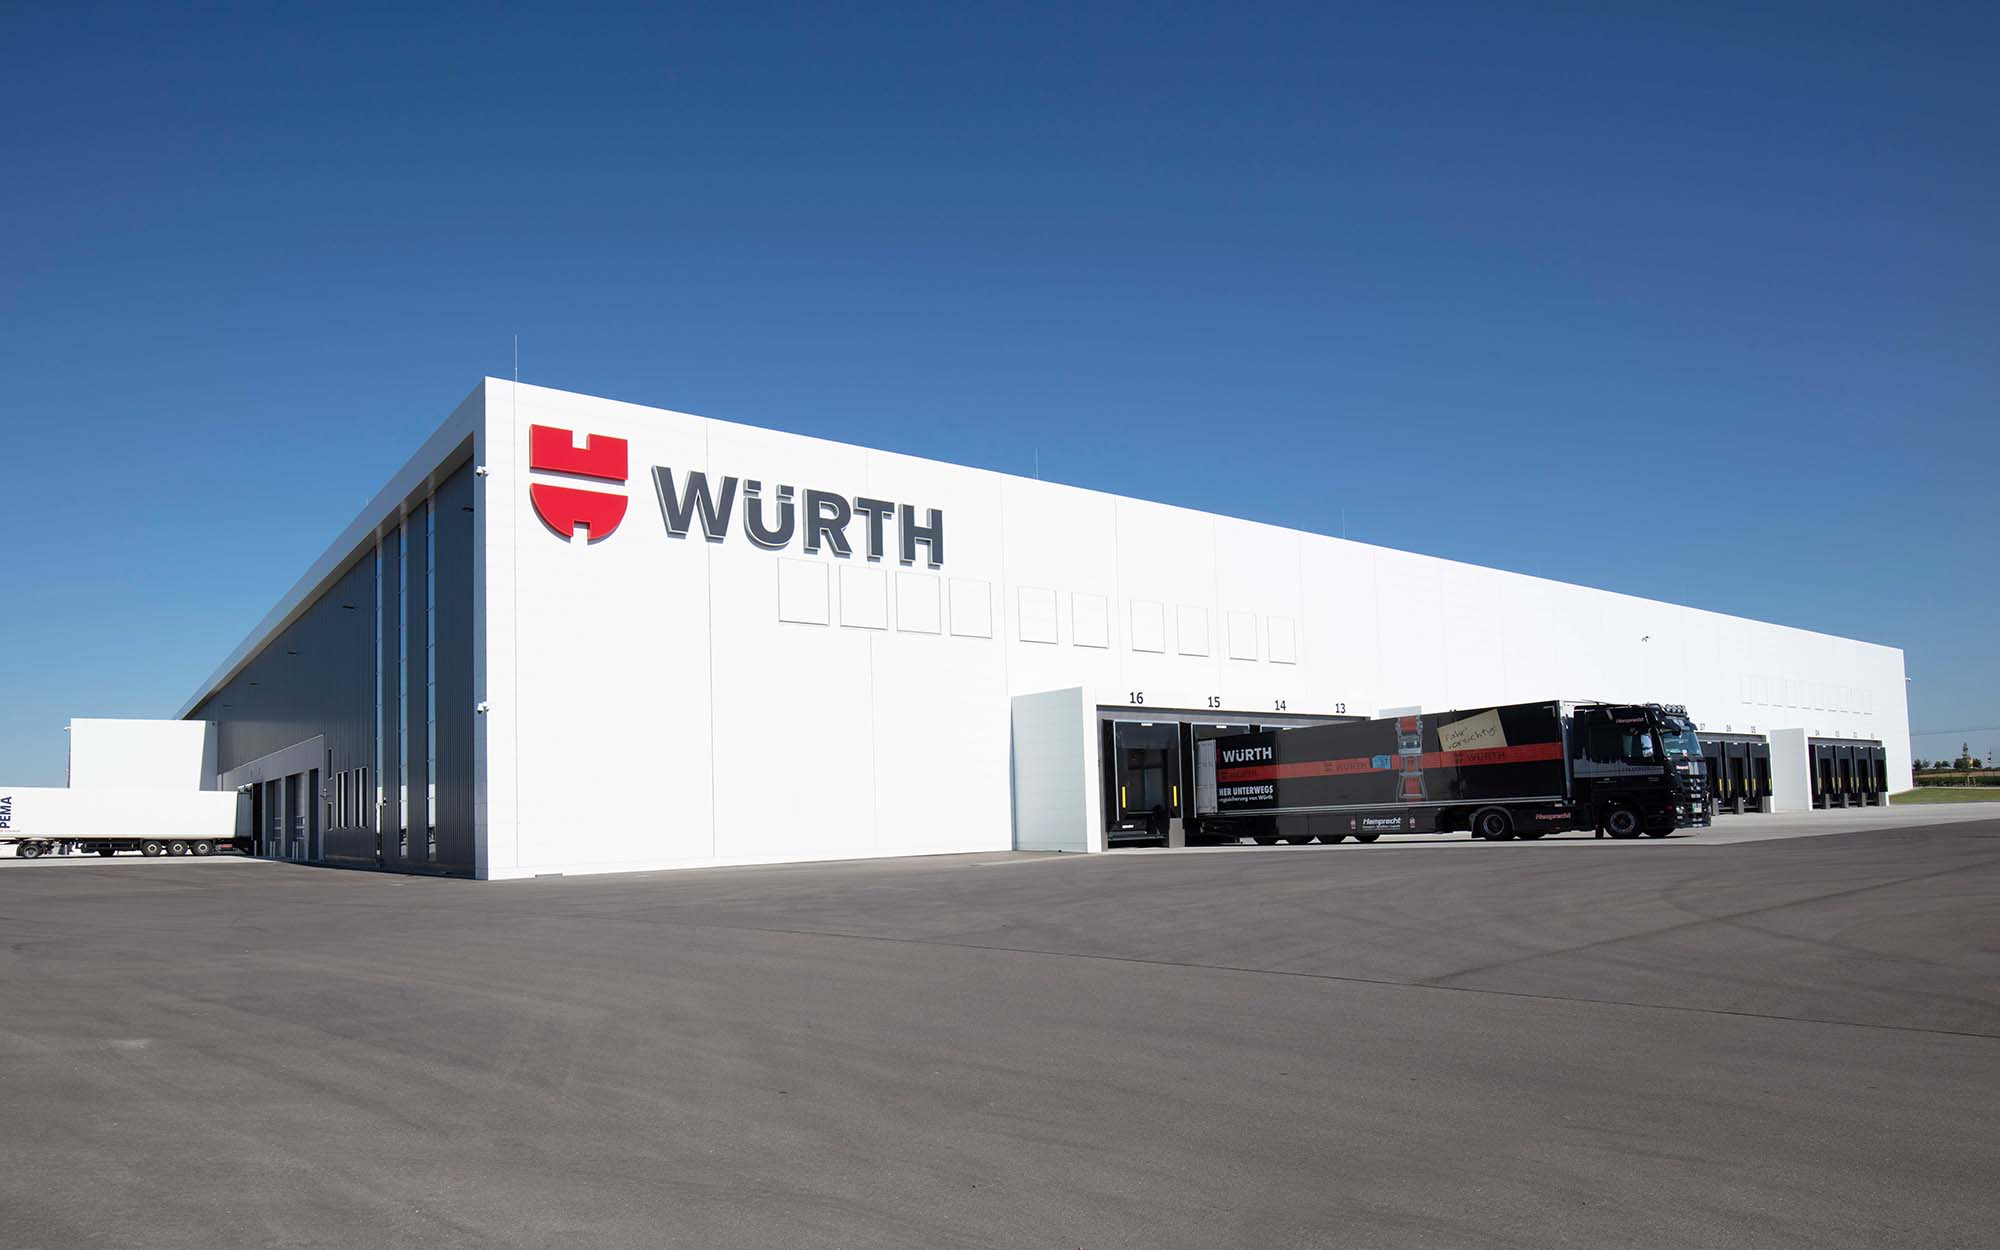 Goods for Würth subsidiaries and shipments to customers throughout Europe are handled at the logistics center of the Adolf Würth GmbH & Co. KG in Kupferzell in the Hohenlohe district in Ba-den-Württemberg. © Würth GmbH & Co. KG